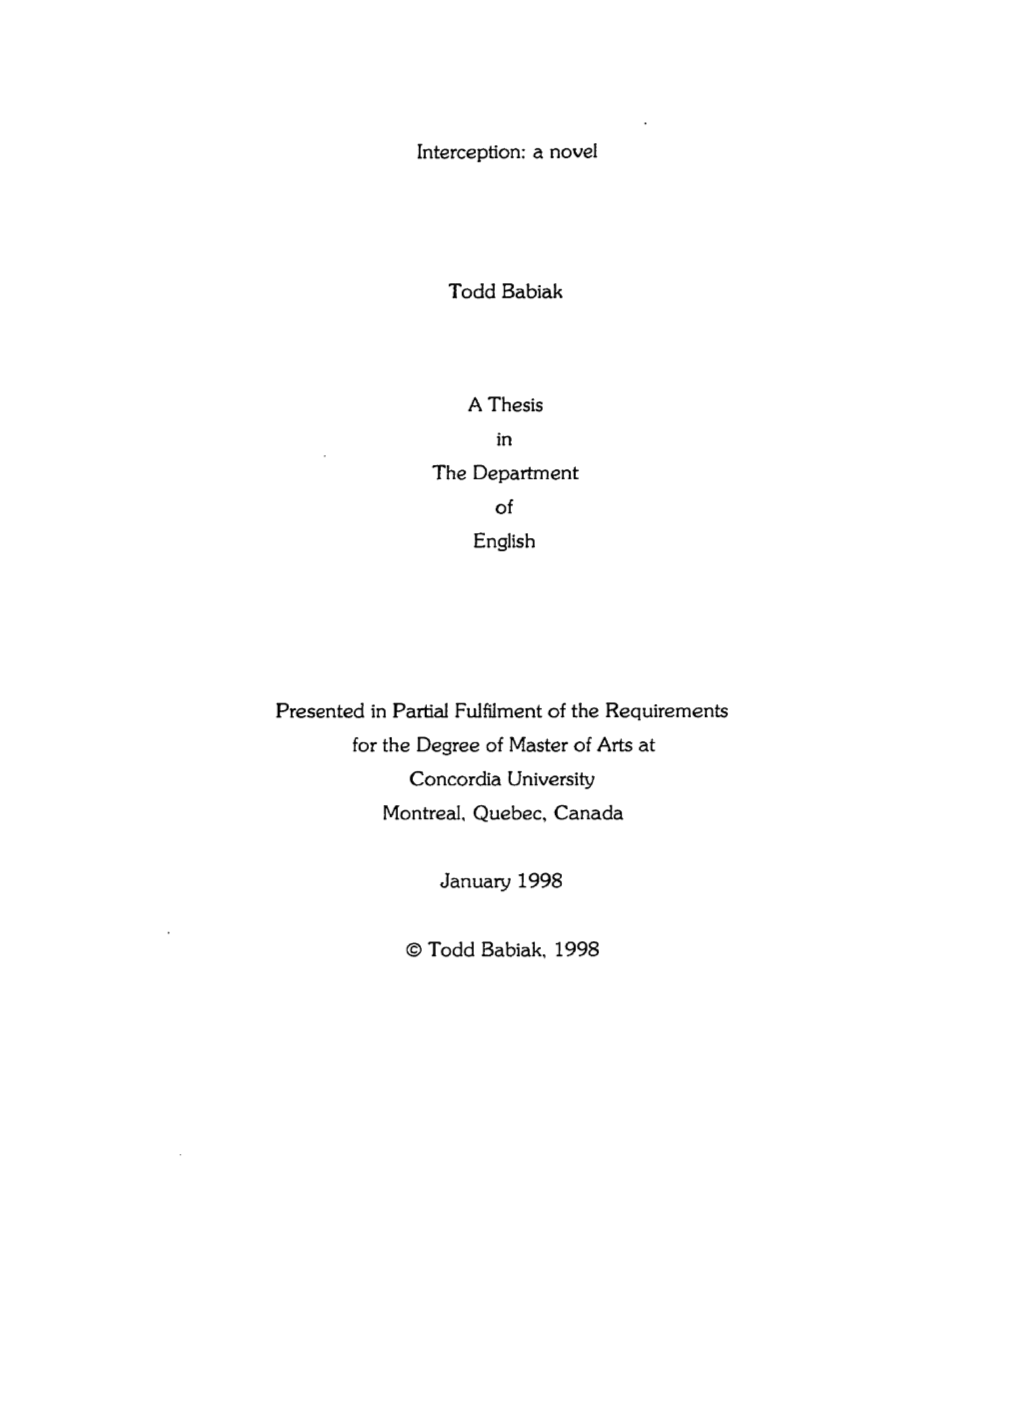 A Novel Todd Babiak a Thesis in the Department English Presented In